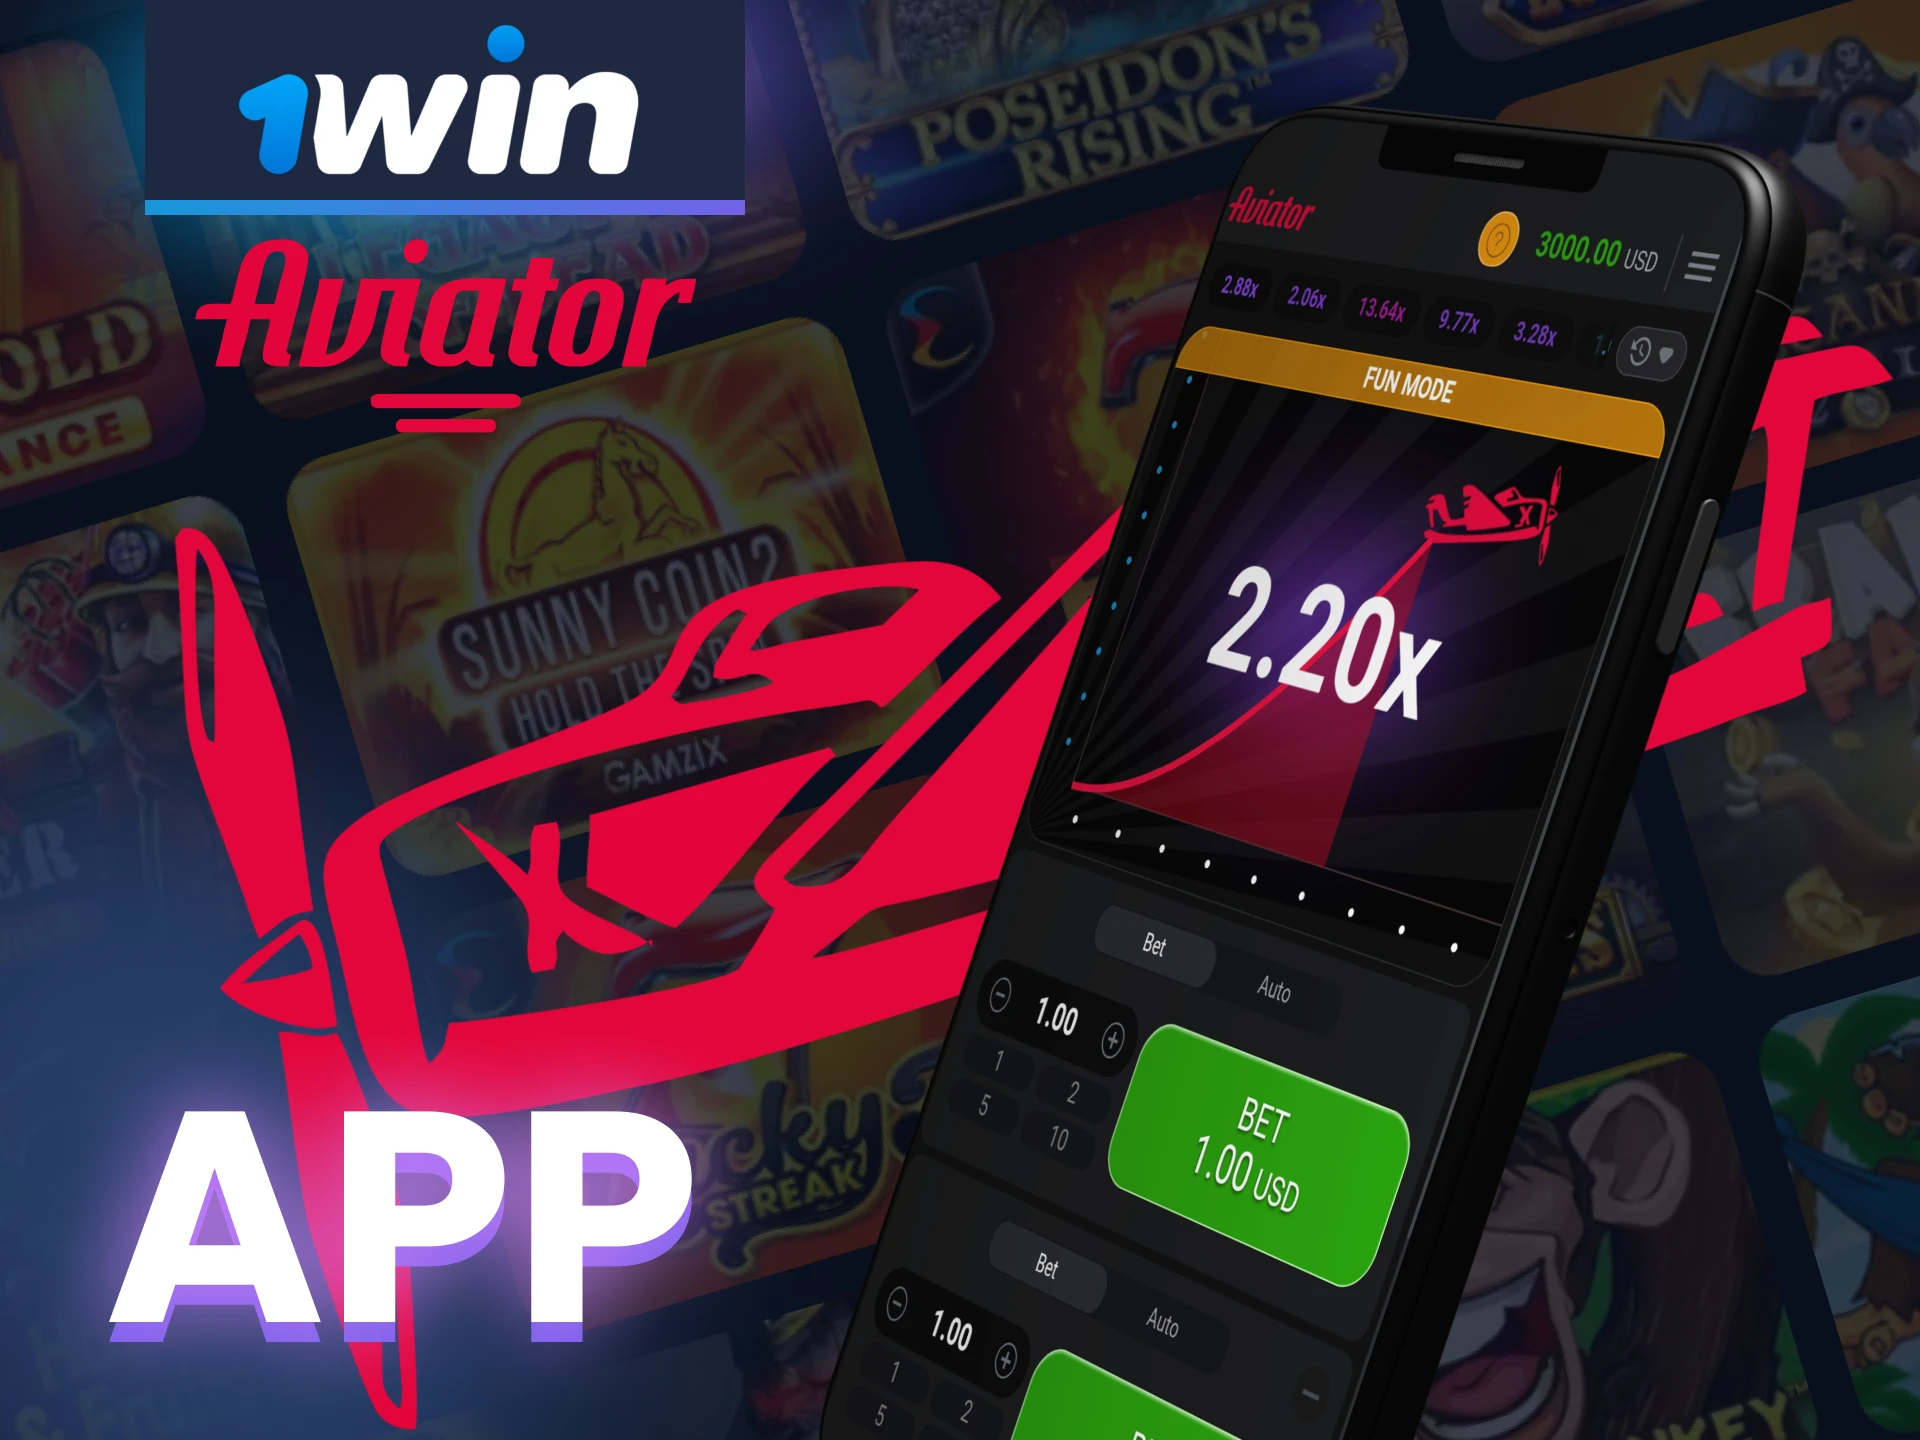 Download the 1win app to play Aviator.